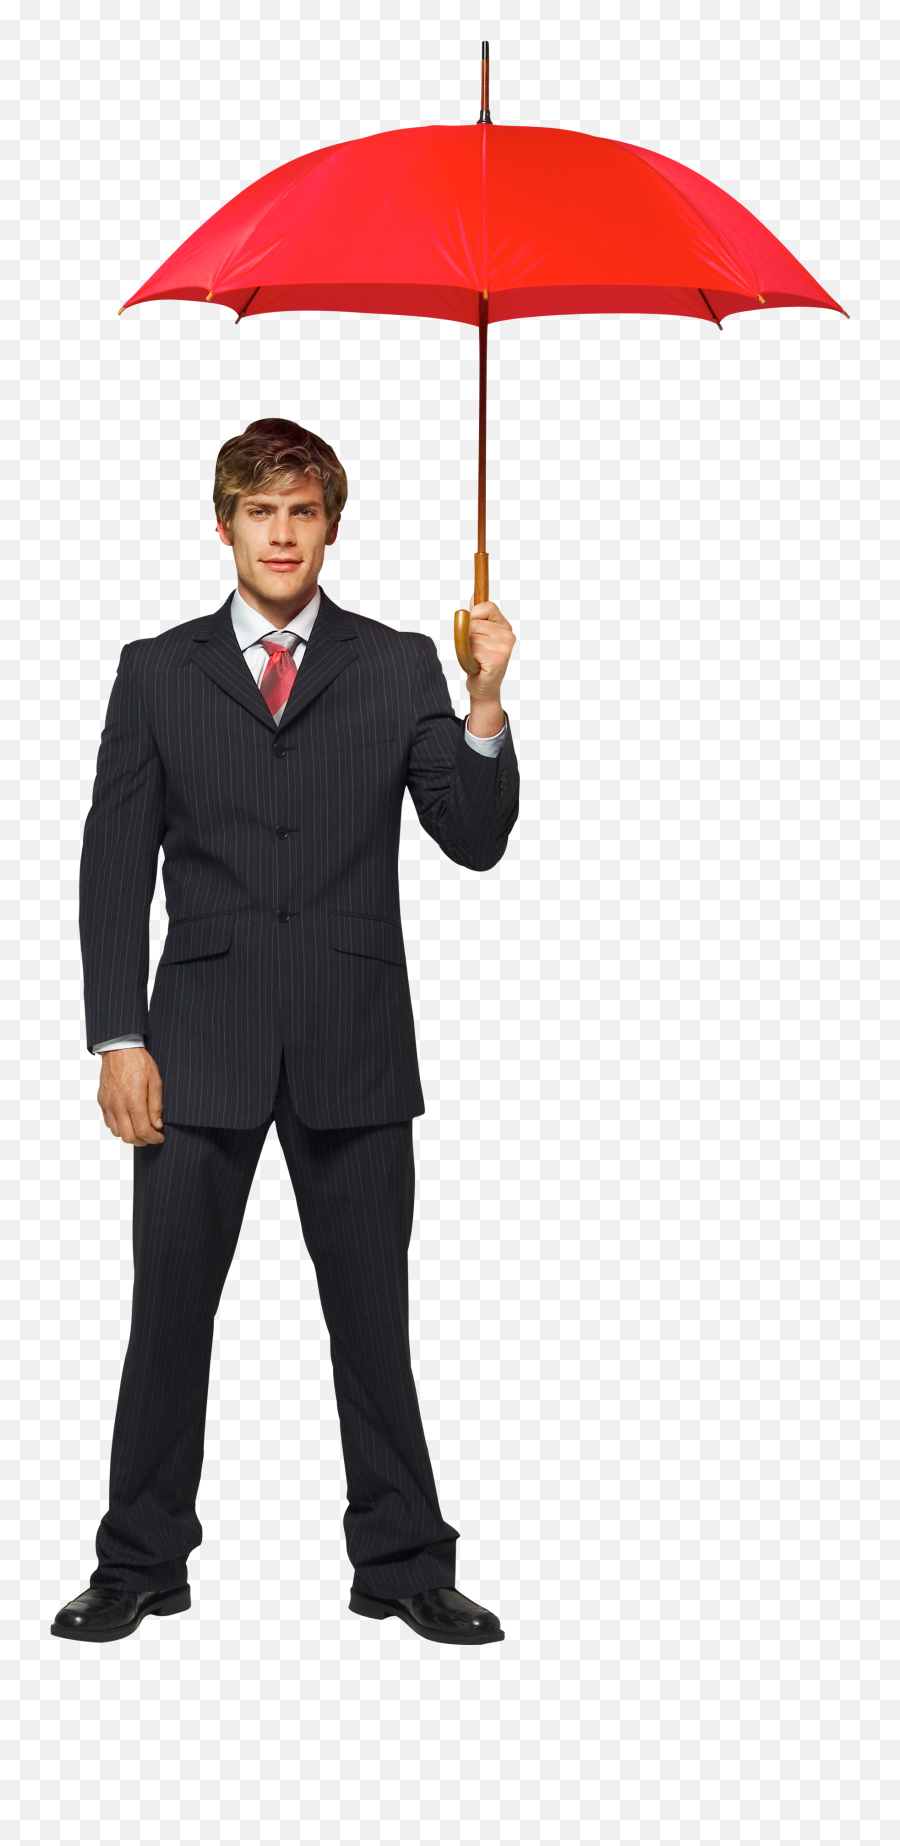 Businessman Png Image - Person With Umbrella Transparent Background,Business Man Png